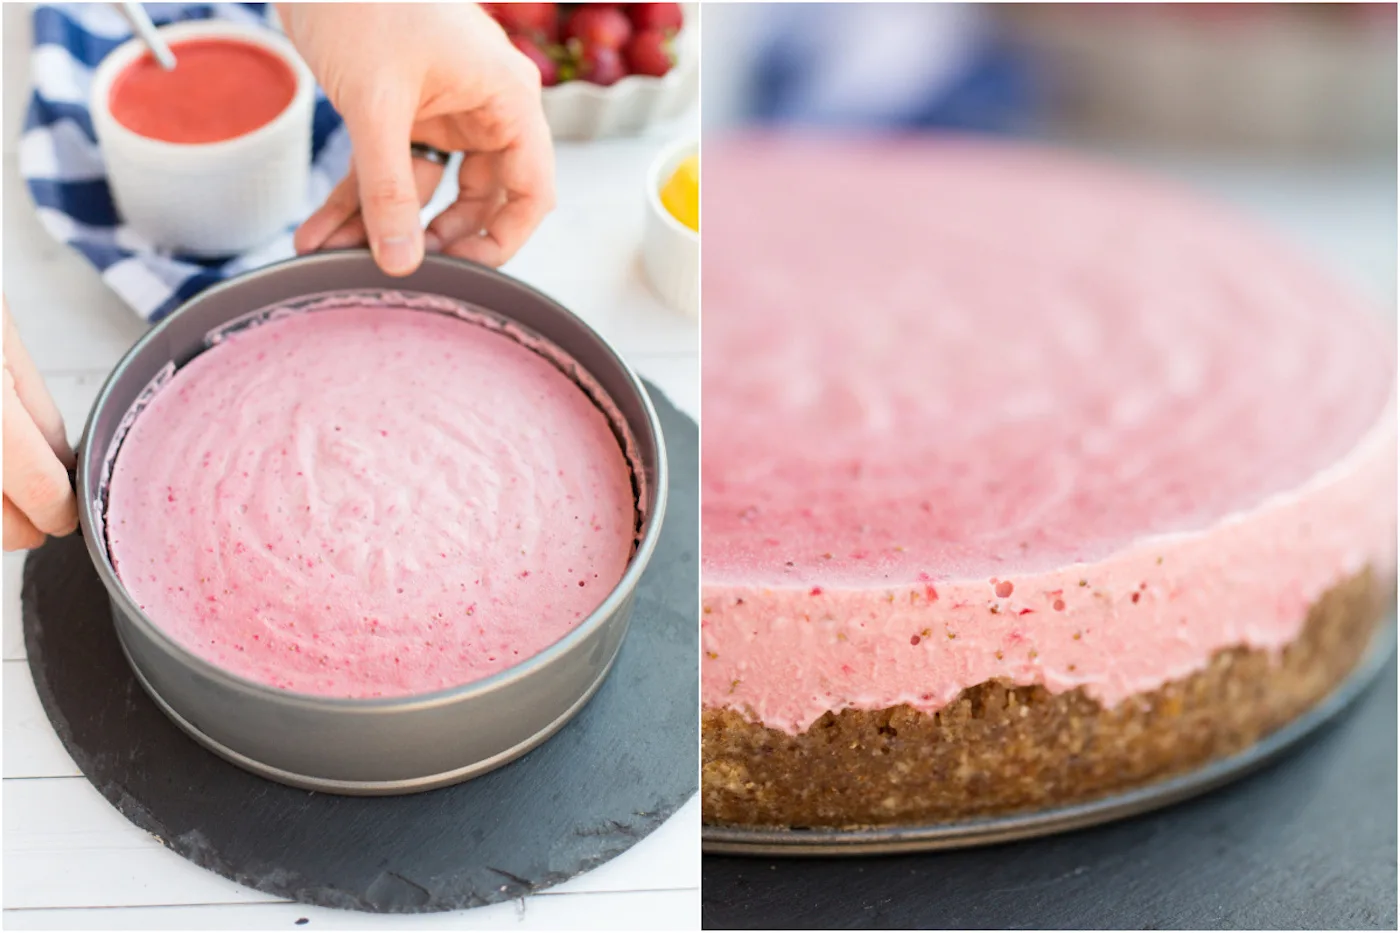 Popping the cheesecake out of the springform pan